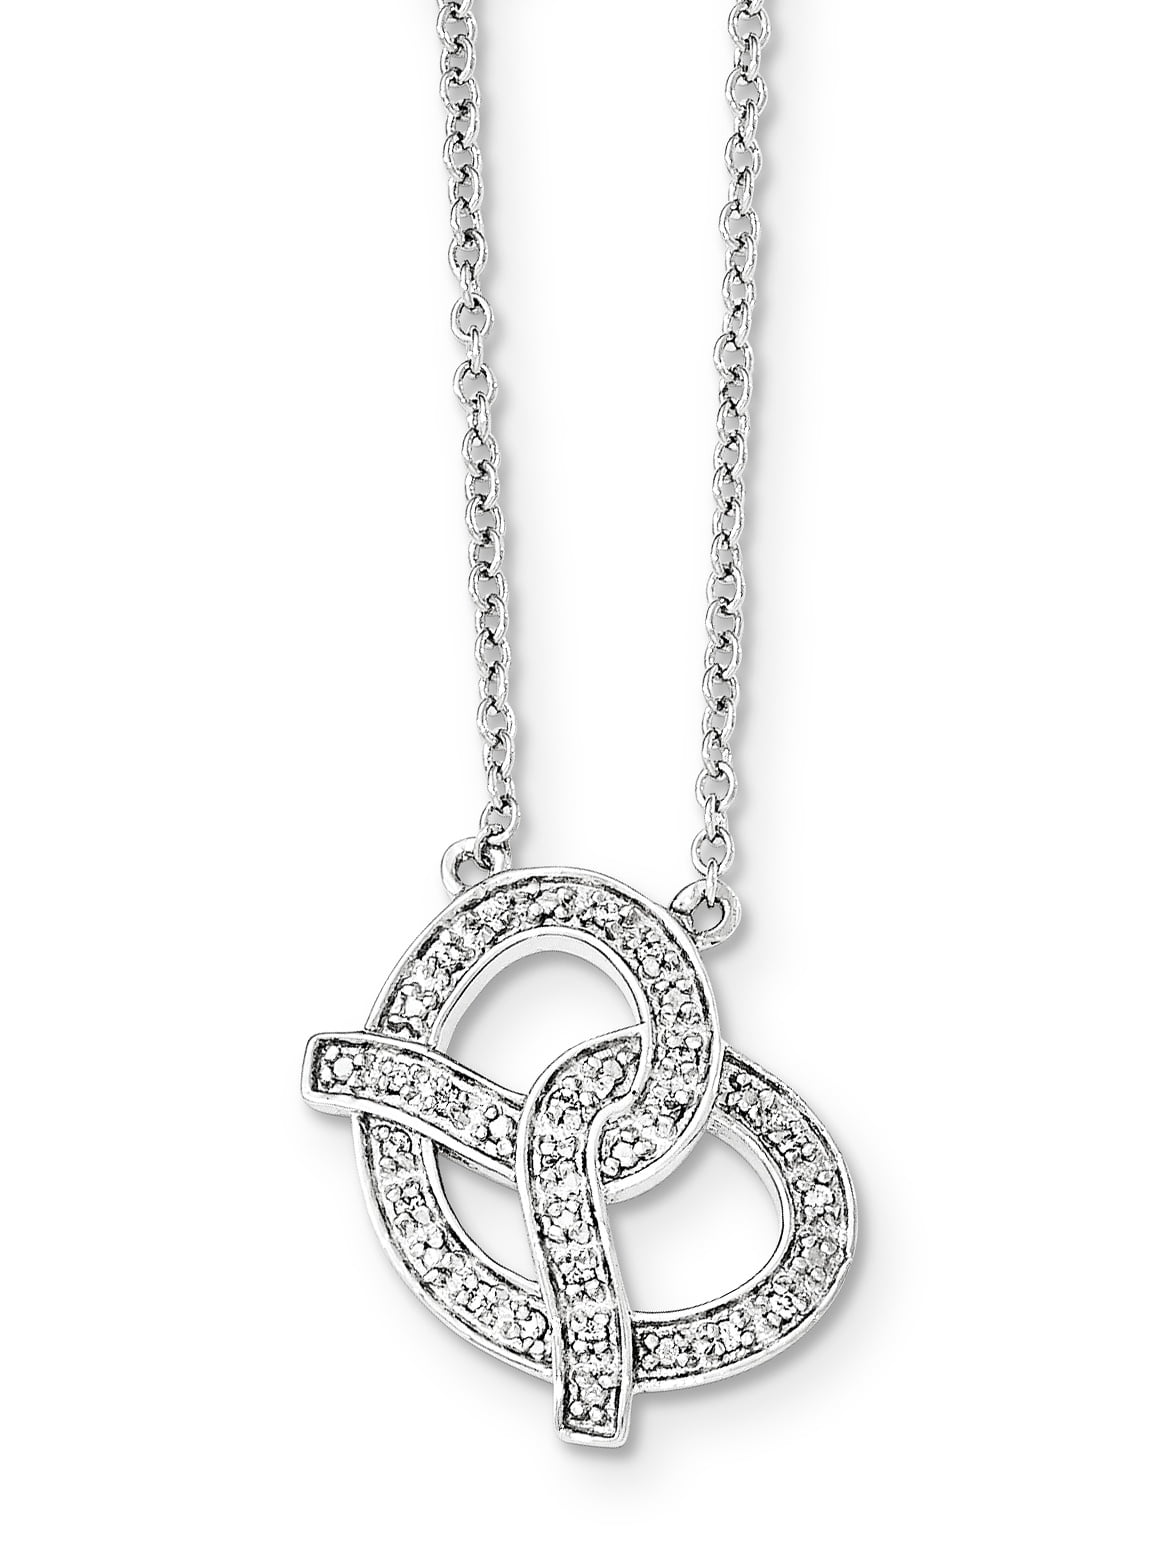 CoutureJewelers Sterling Silver & CZ Love Knot Necklace 